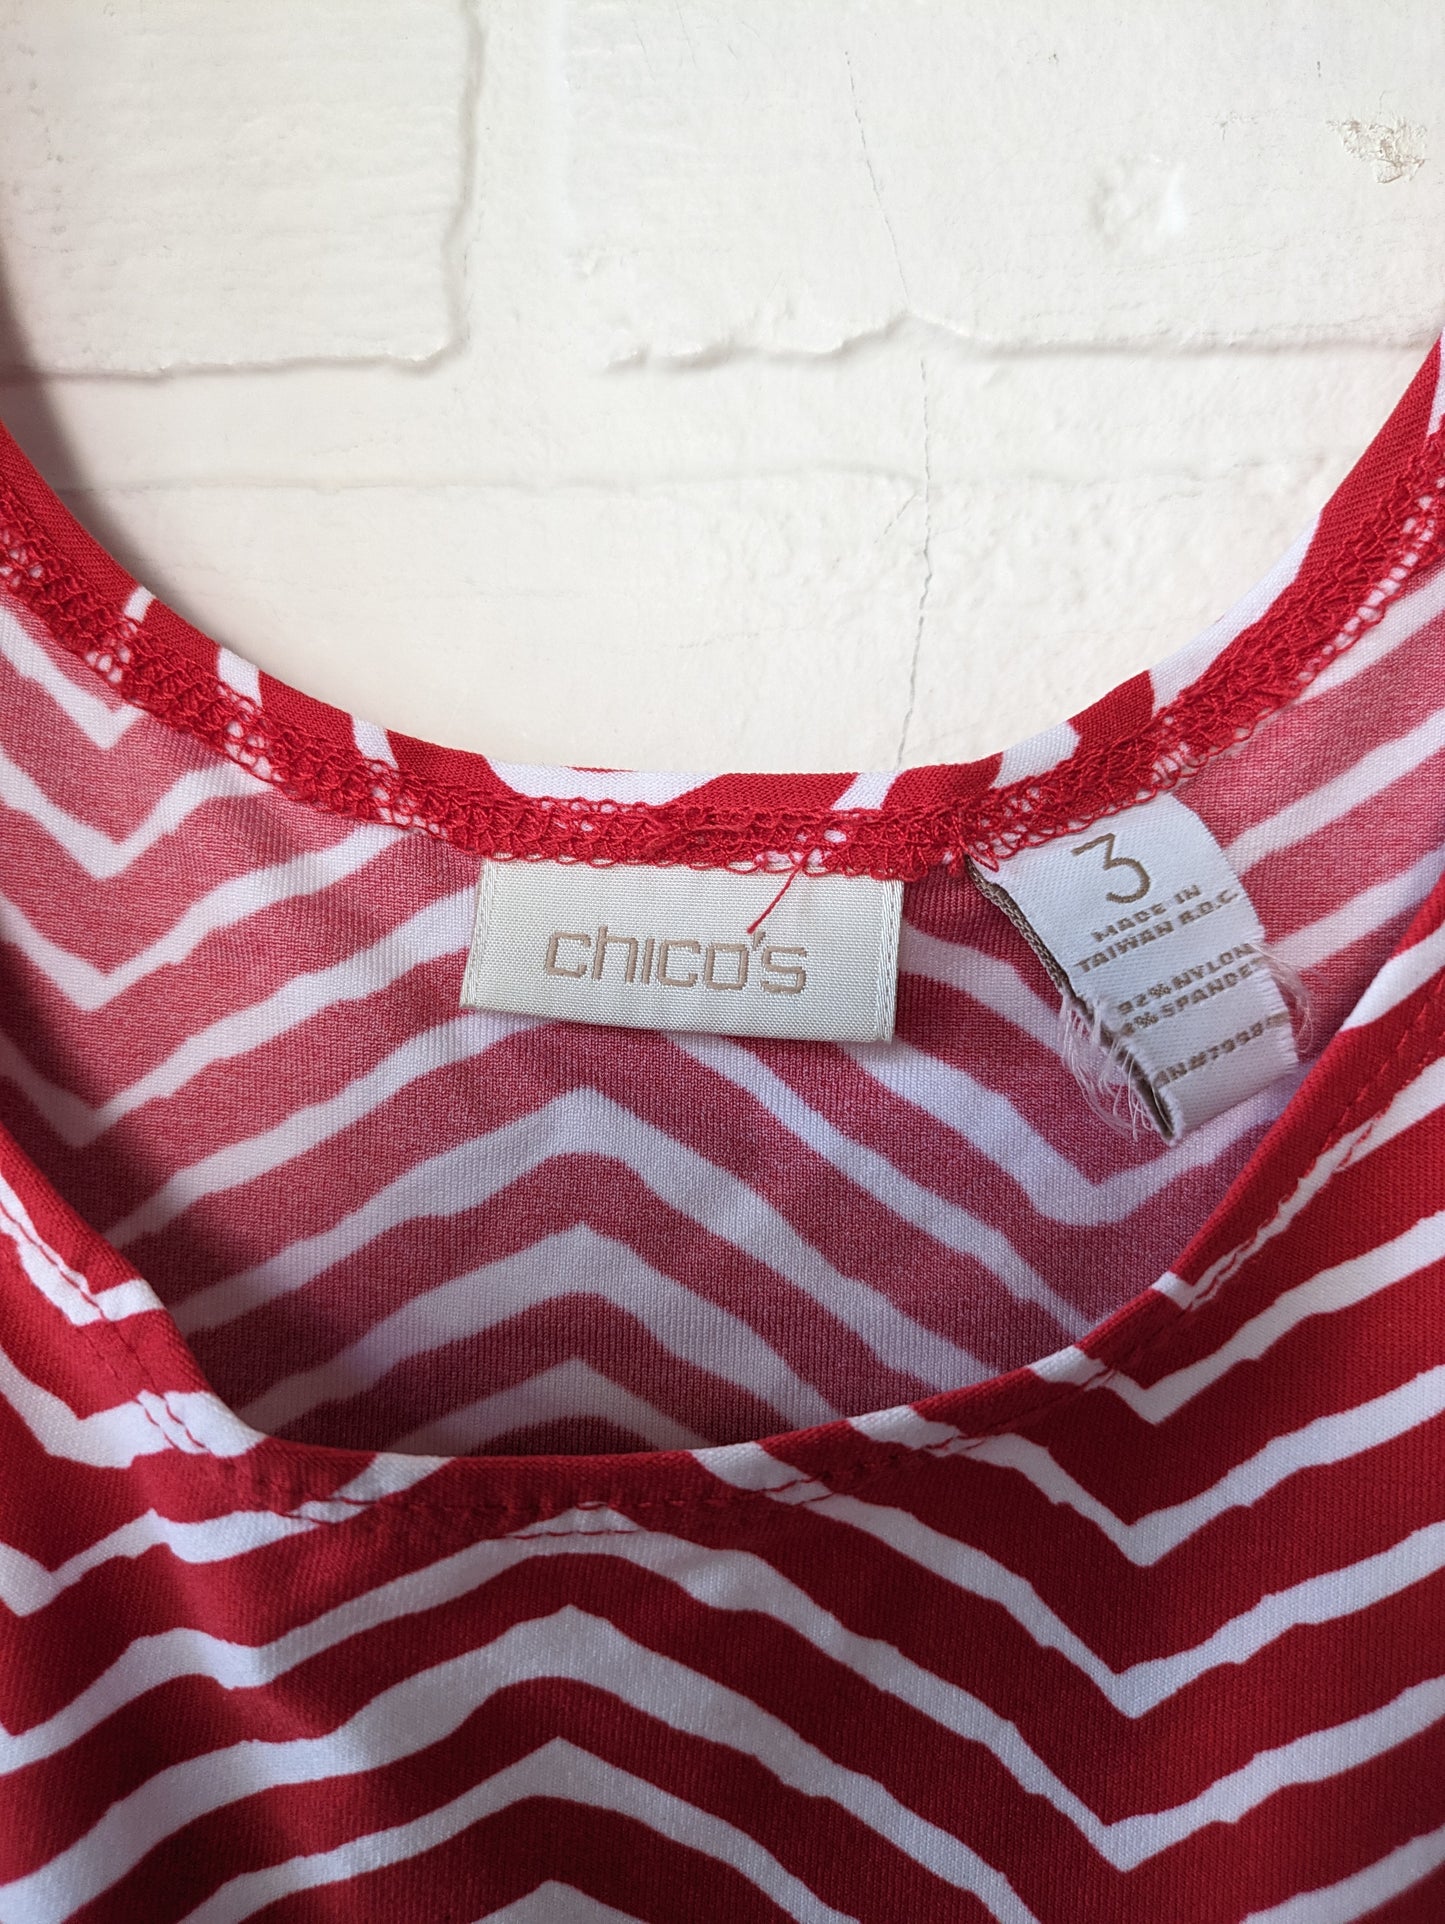 Tank Top By Chicos  Size: L